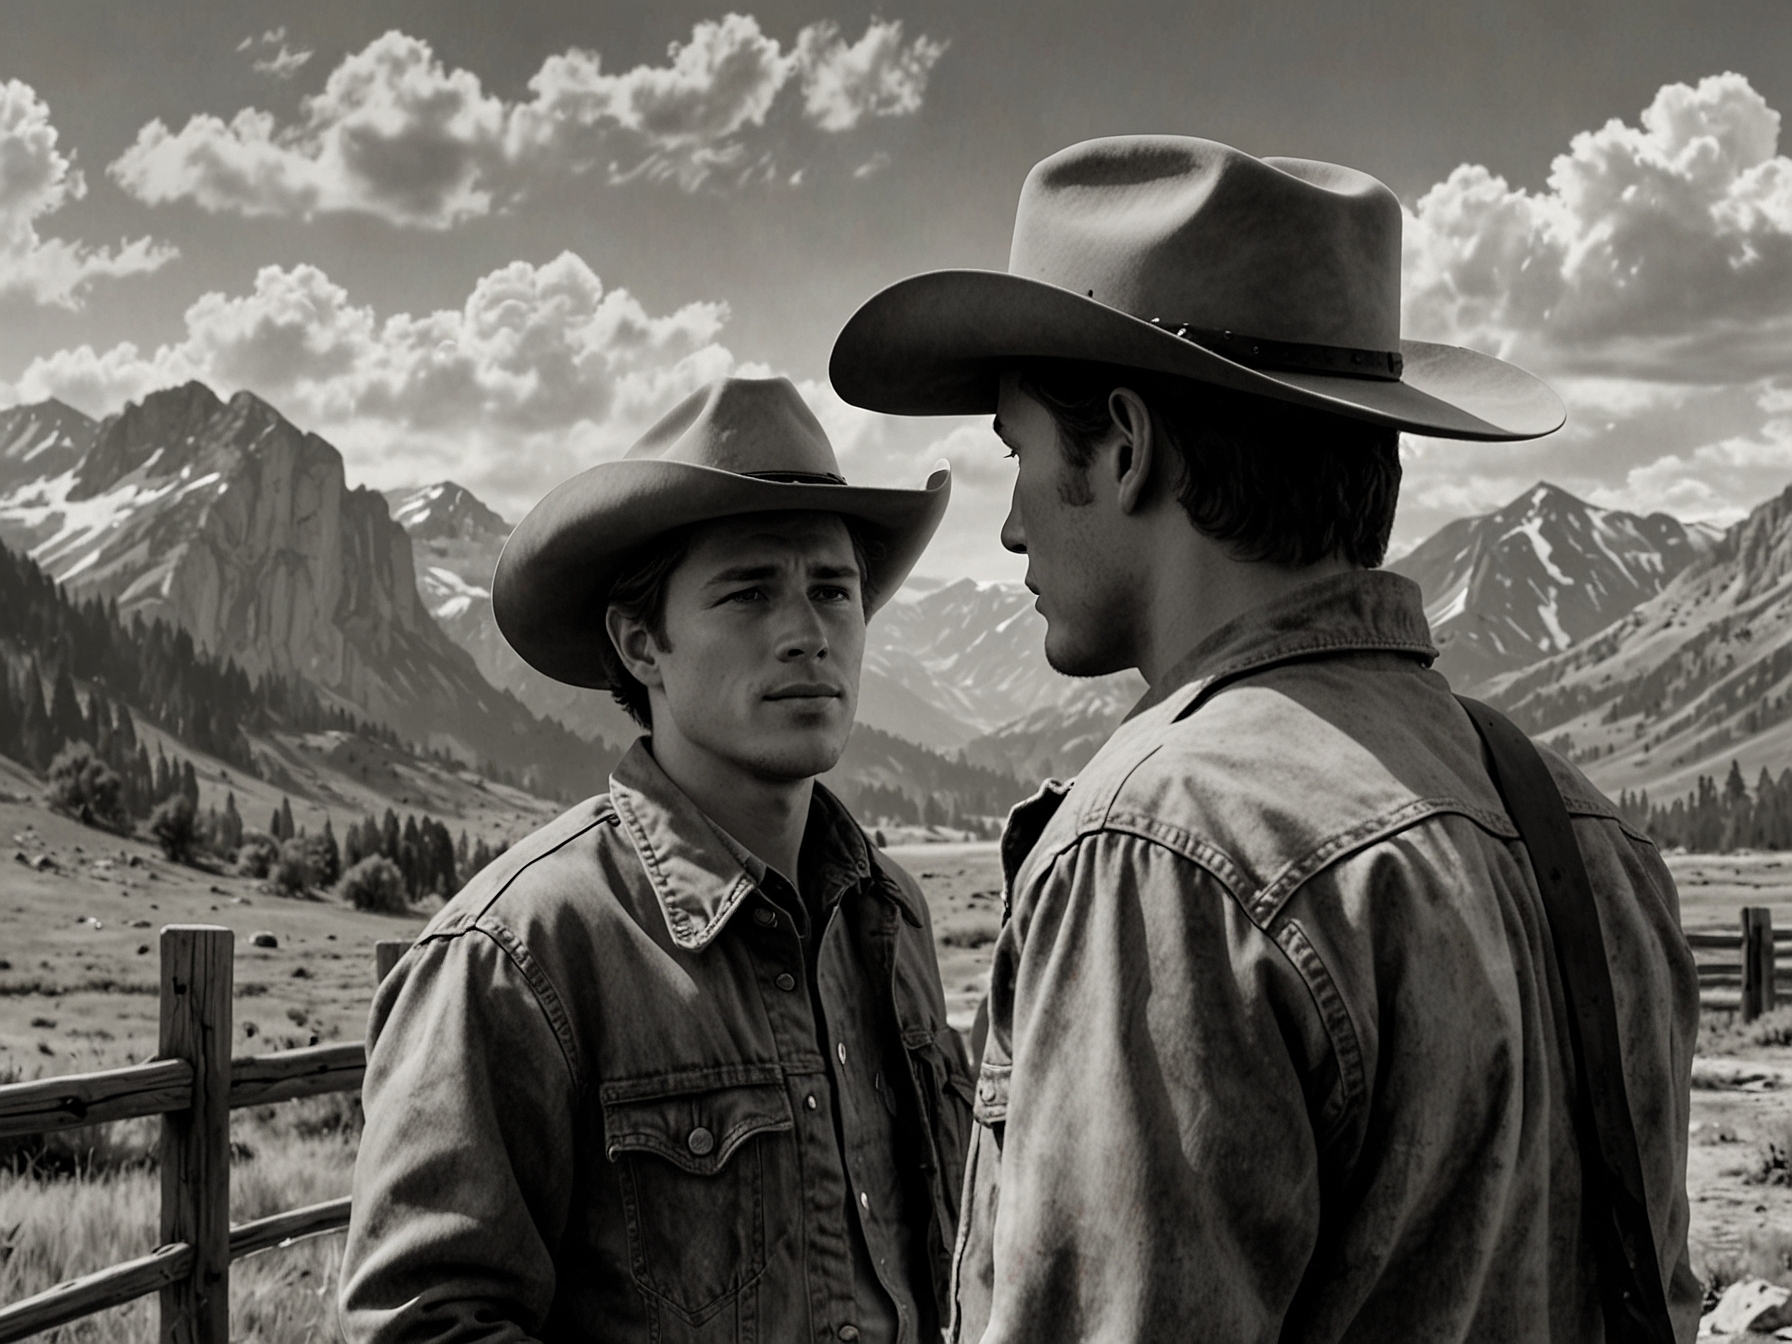 A screenshot of Brokeback Mountain featuring Ennis Del Mar and Jack Twist against a scenic mountain backdrop, representing the film’s poignant and emotional atmosphere.